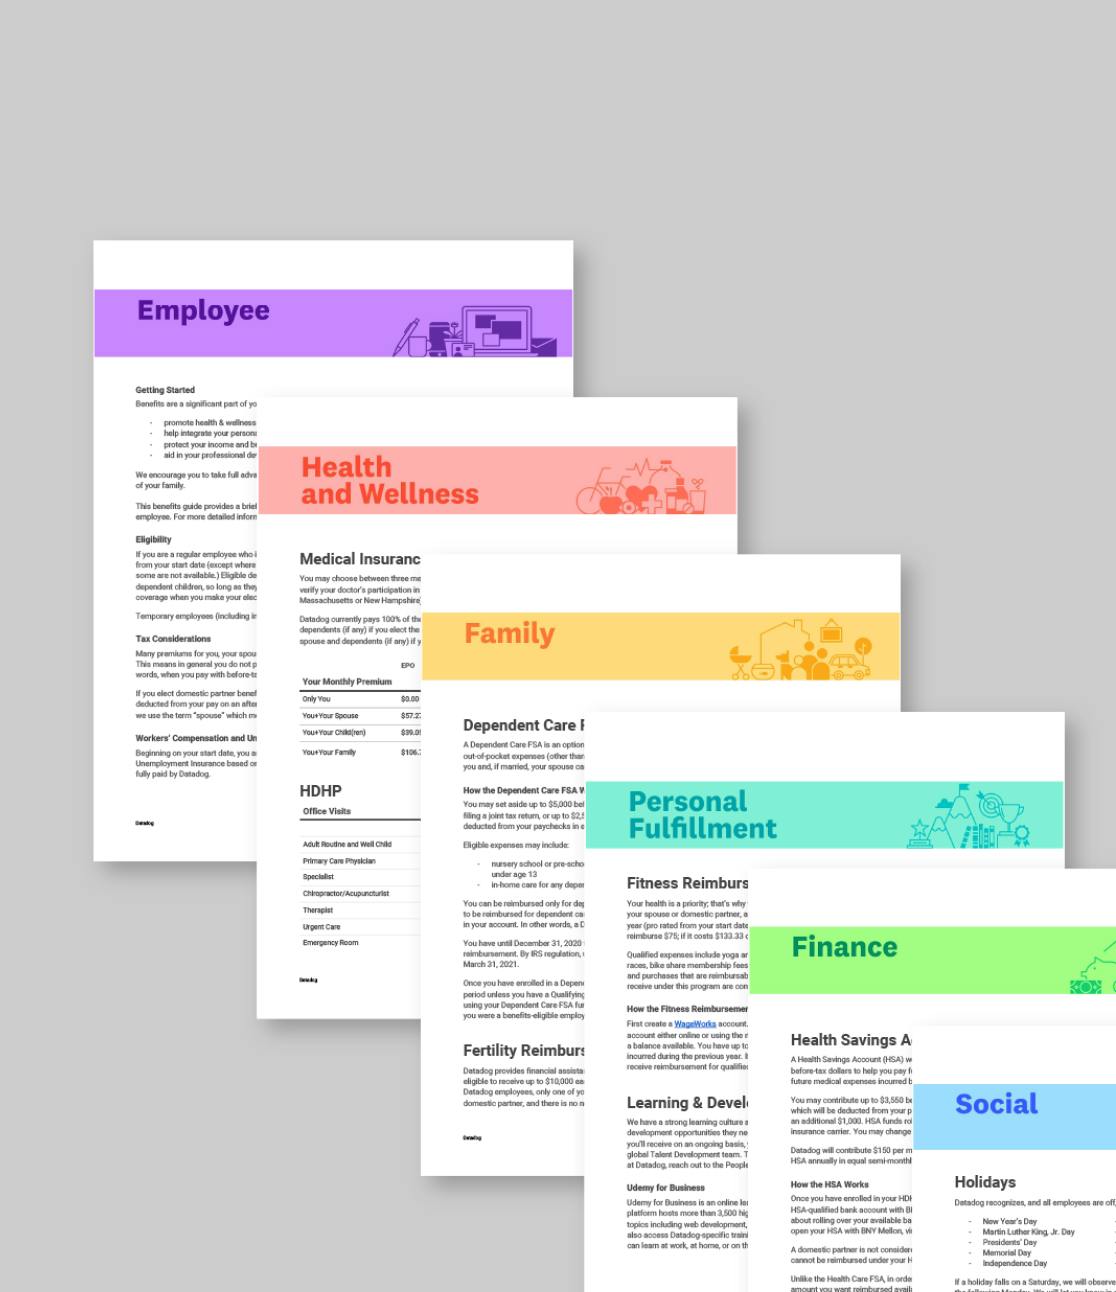 Datadog Benefit Guideleines, detailing the benefits and programs offered by Datadog are layered diaganolly from top left to bottom right on a light gray background. Information is presented in black text on a white background and a banner consistent with the category of benefit is included across the top of each page.